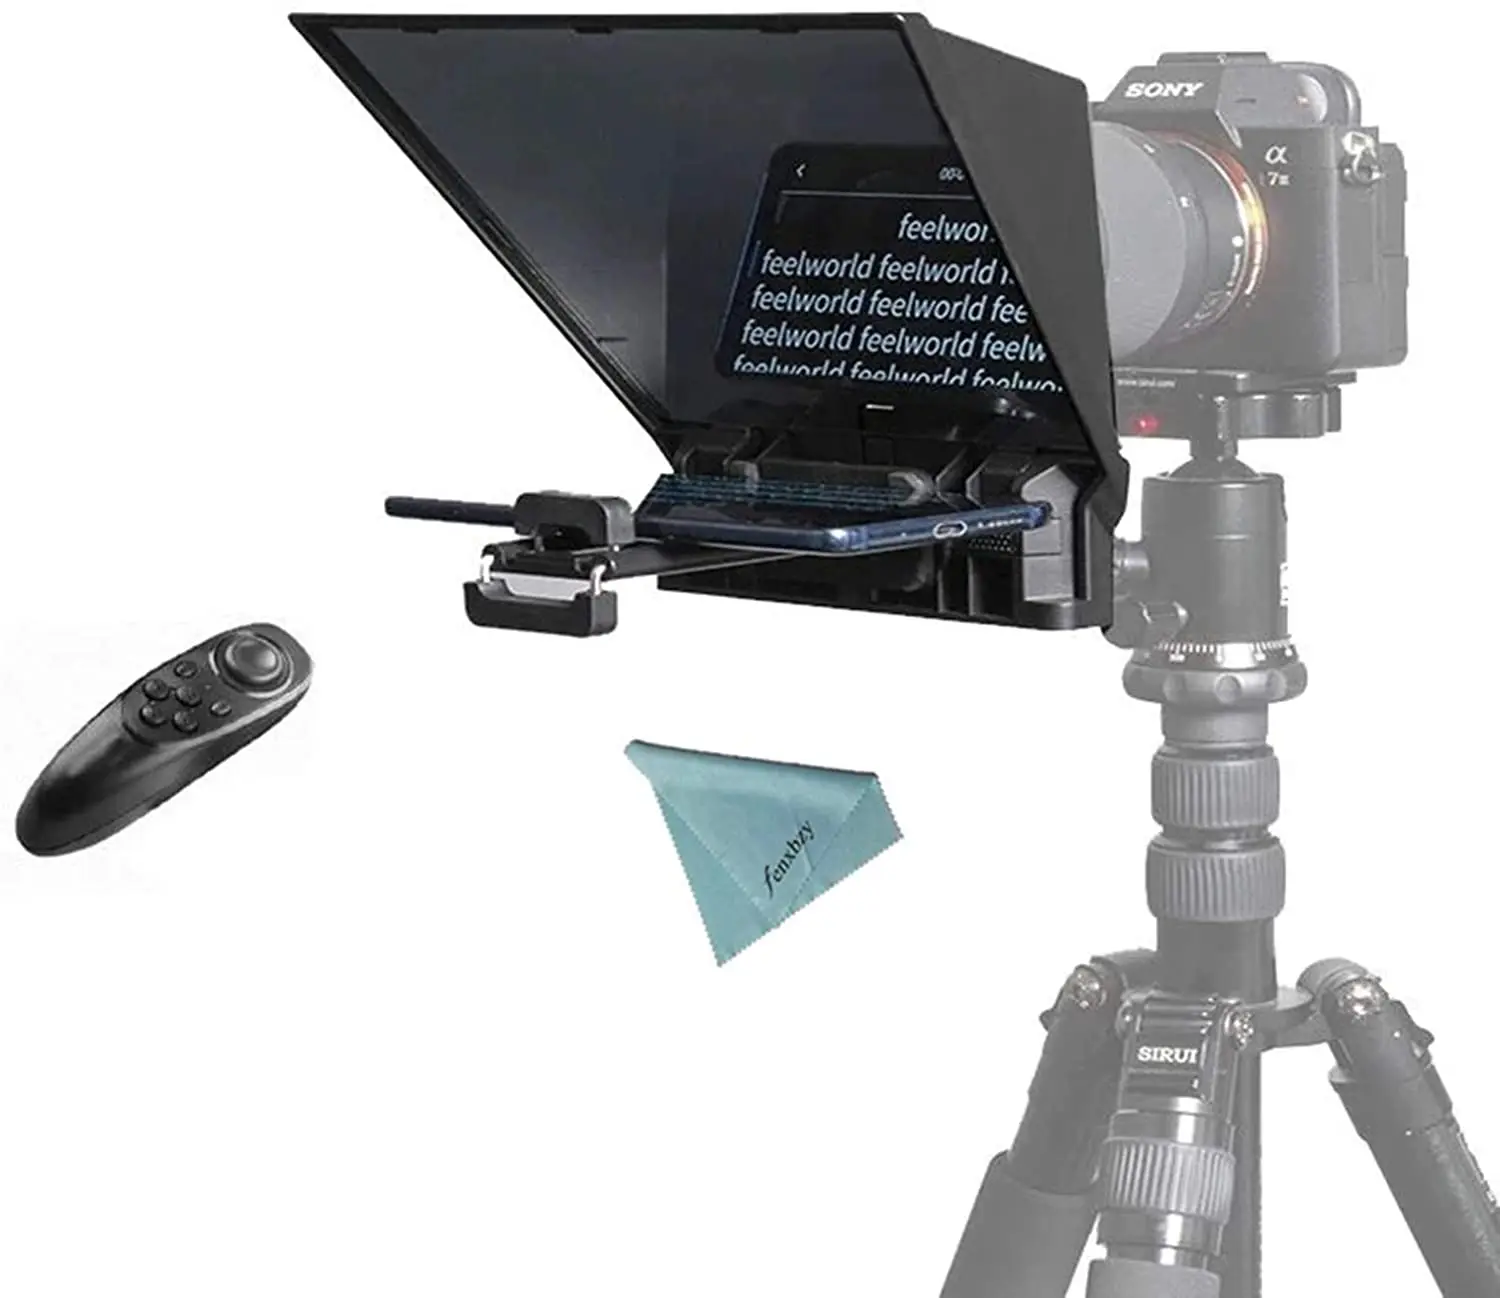 

CamKoo Portable Teleprompter With Remote Control For Mobile Phones Tablets Cameras For Live Broadcast Video Recording Teaching